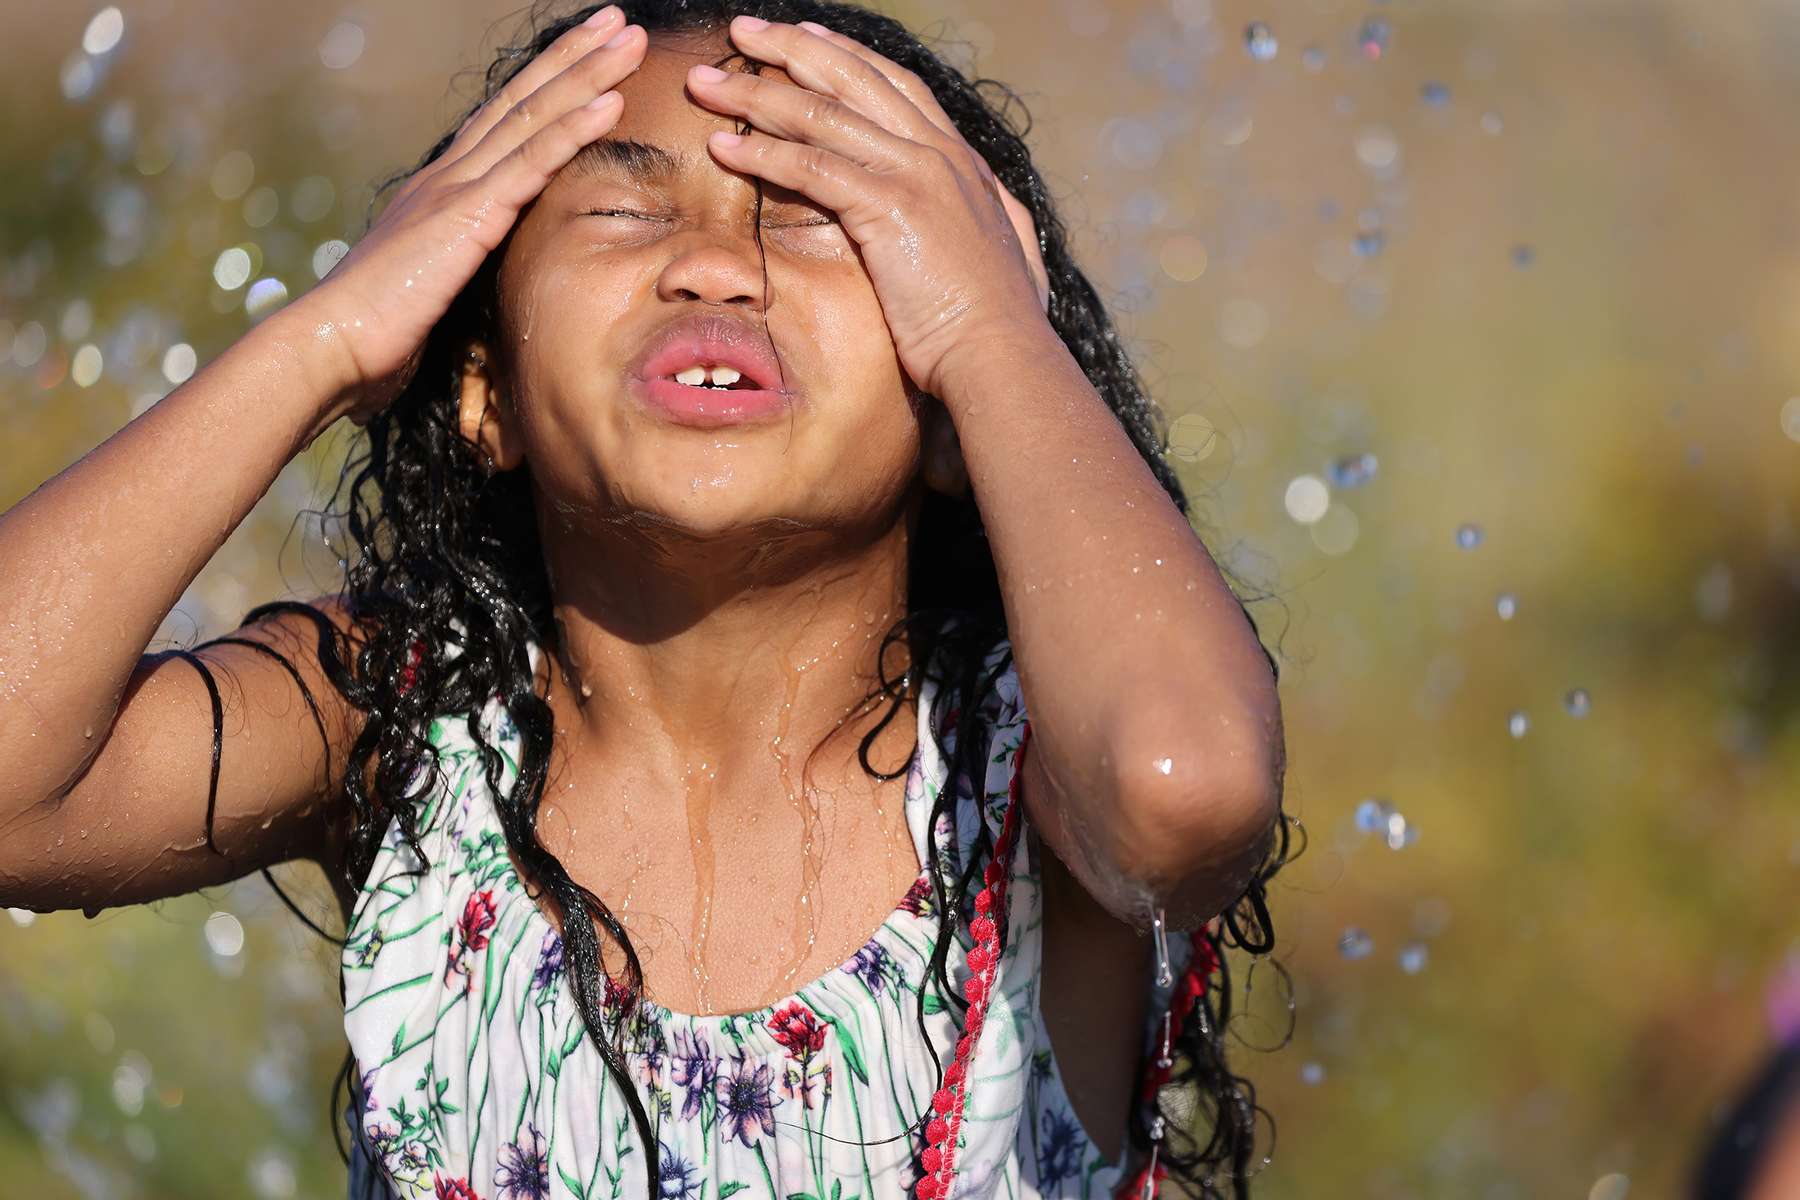 Isis Macadaeg, age 7, plays in a spray park at Jefferson Park during a heat wave in Seattle, Washington, U.S., June 27, 2021. REUTERS/Karen Ducey